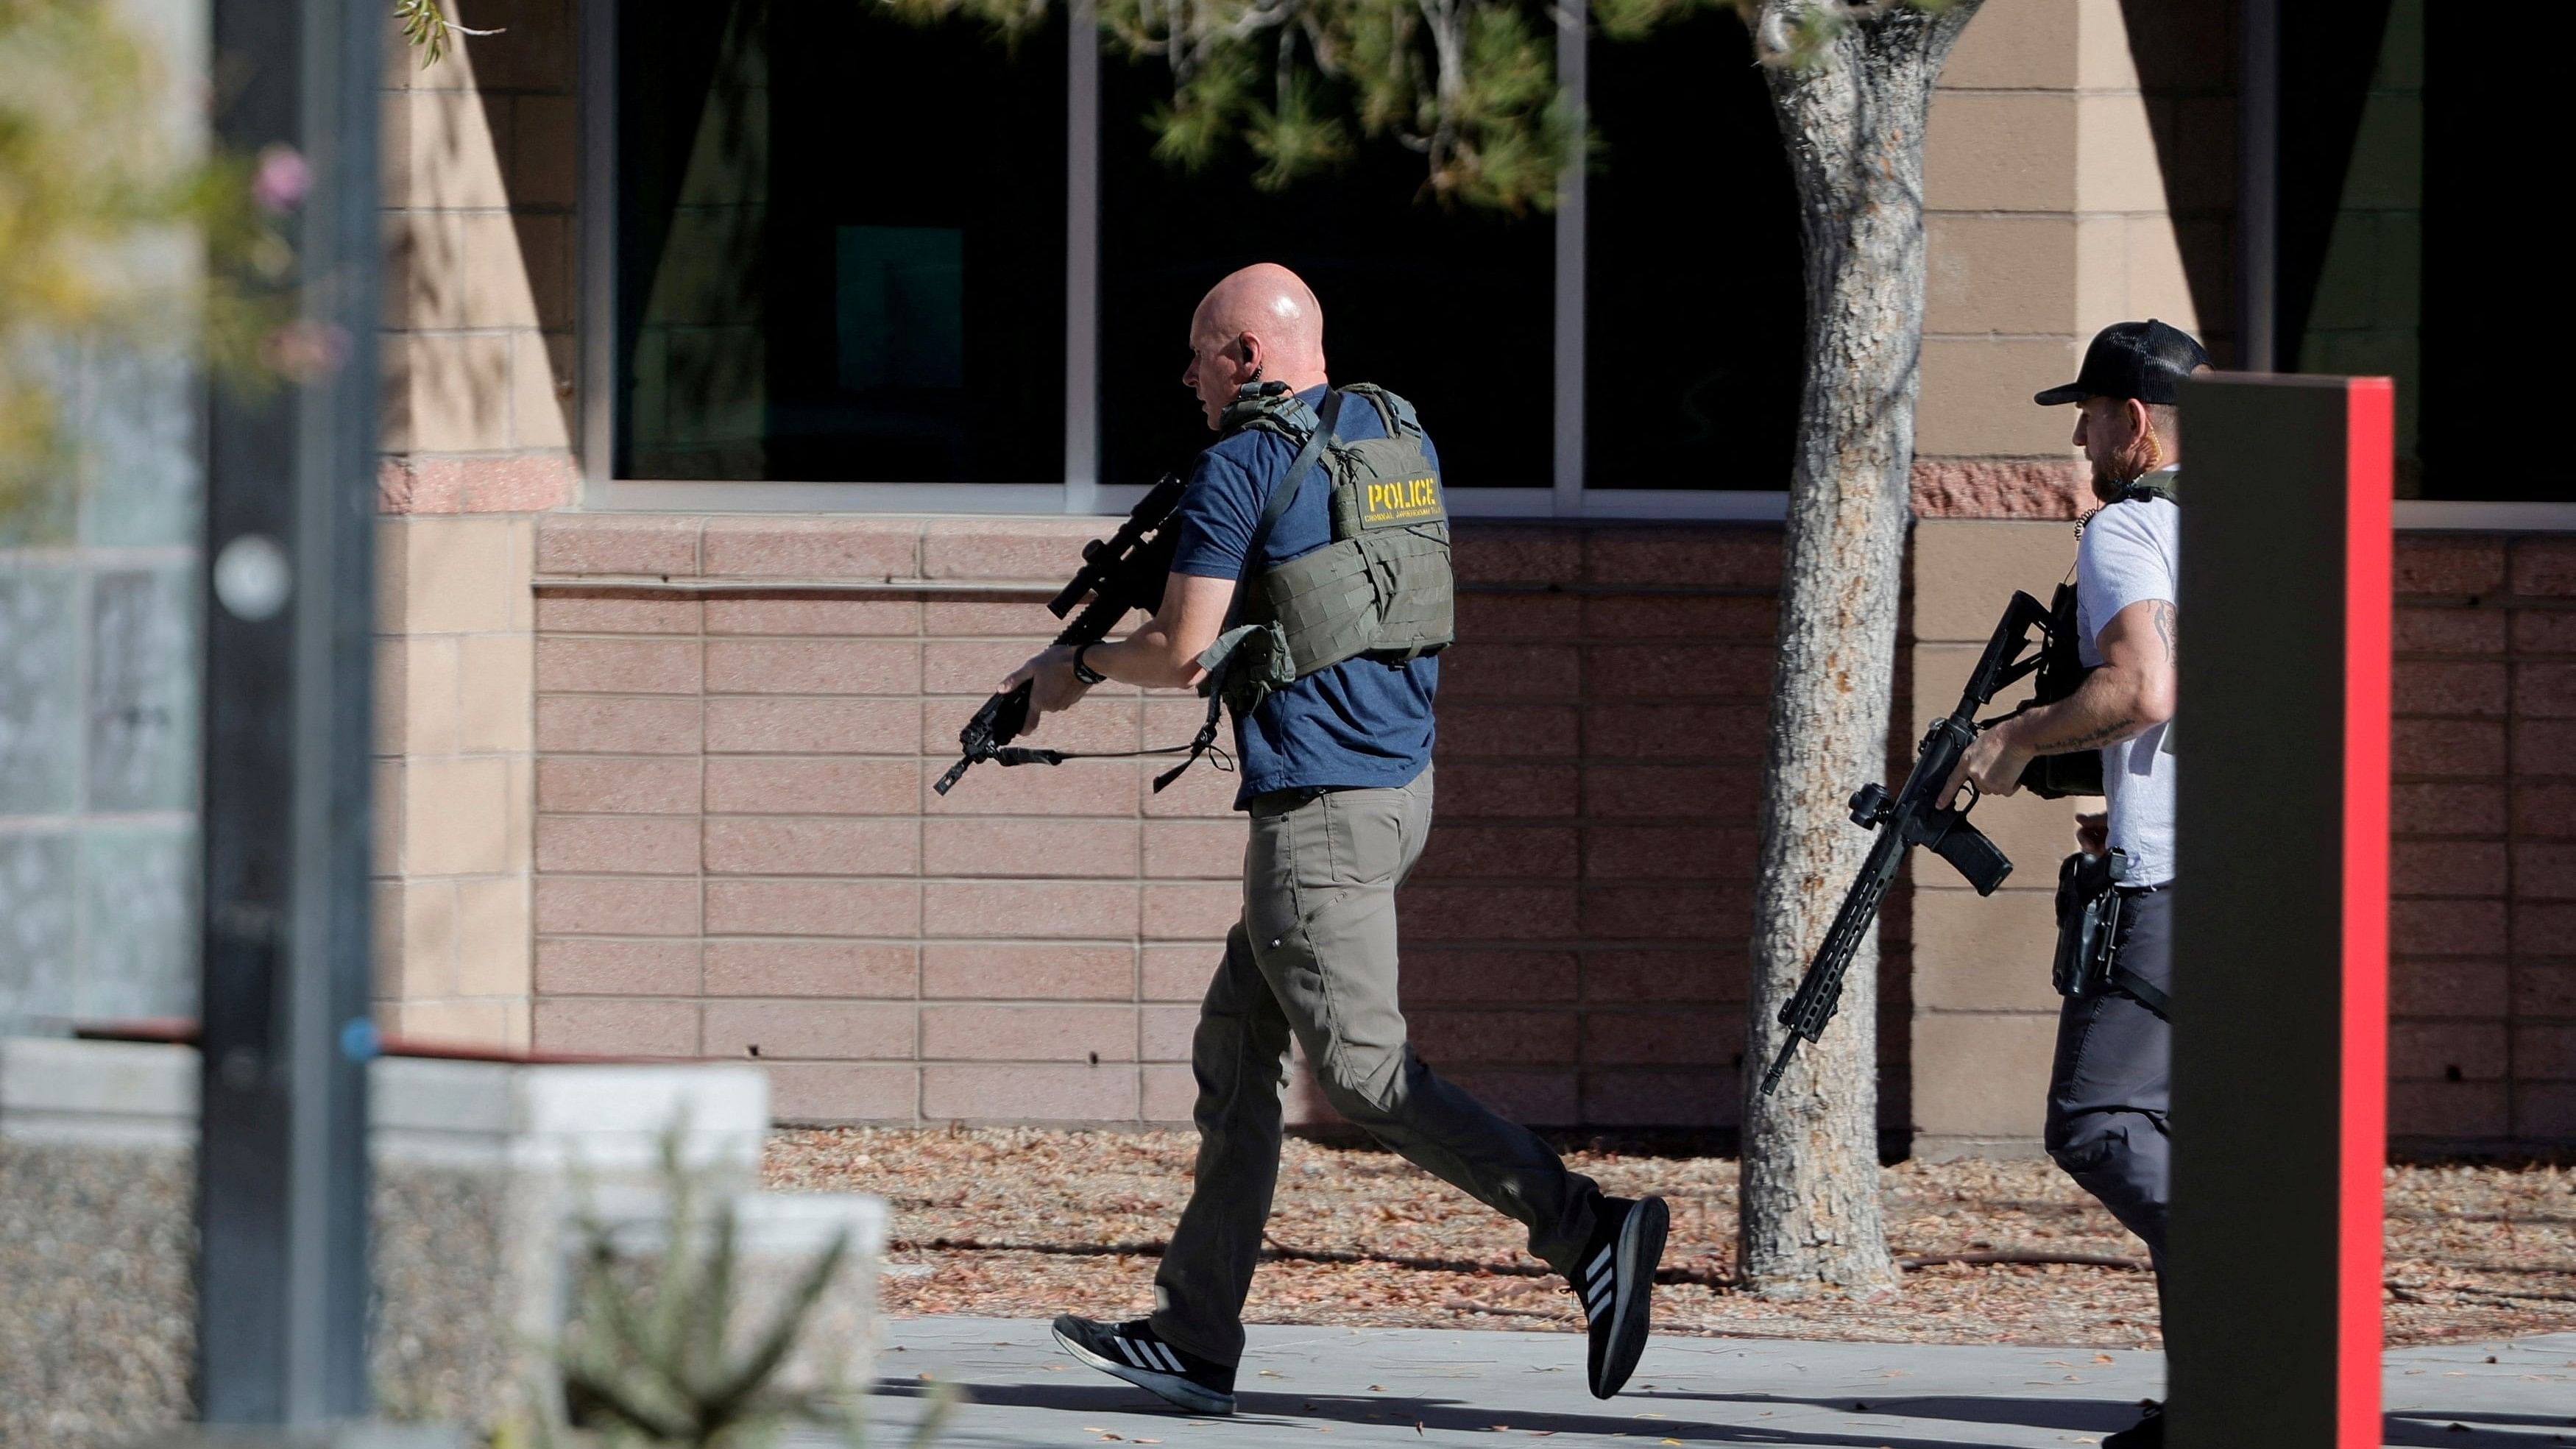 <div class="paragraphs"><p>Law enforcement officers head into UNLV campus after reports of an active shooter in Las Vegas, Nevada.</p></div>